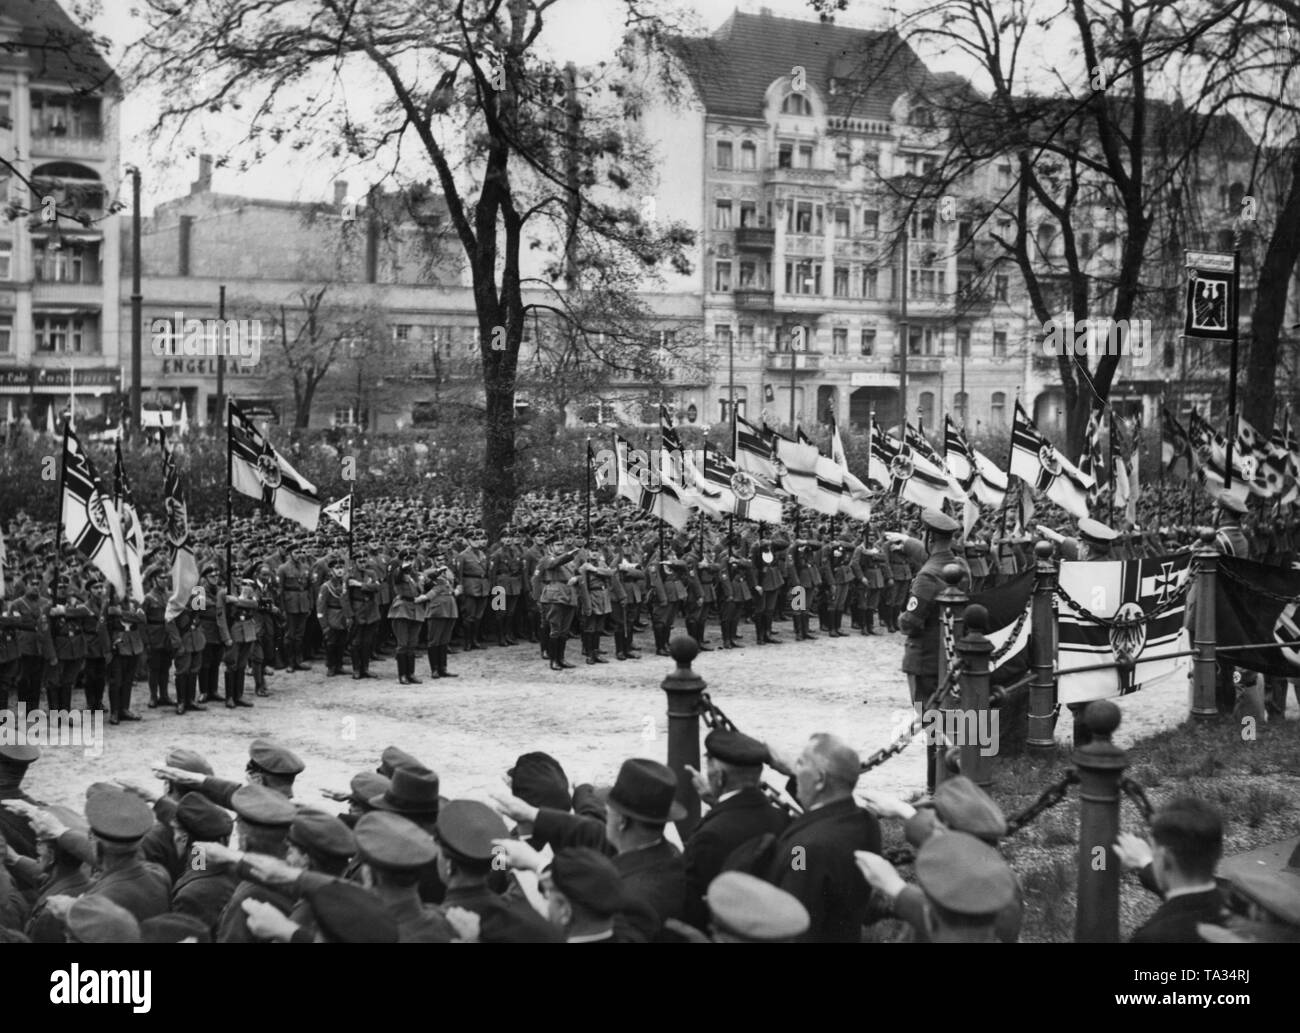 After the reintroduction of compulsory military service, the National Socialist Alliance of Red Front-Fighters (Stahlhelm) decided to remove the black ribbon from their flags. 8,000 men of the Berlin Gau of the Stahlhelm were deployed on Jahnsportplatz in the Volkspark Hasenheide in Berlin, in order to solemnly remove the black ribbons from the flags. Here, during the singing of the national anthem. Stock Photo